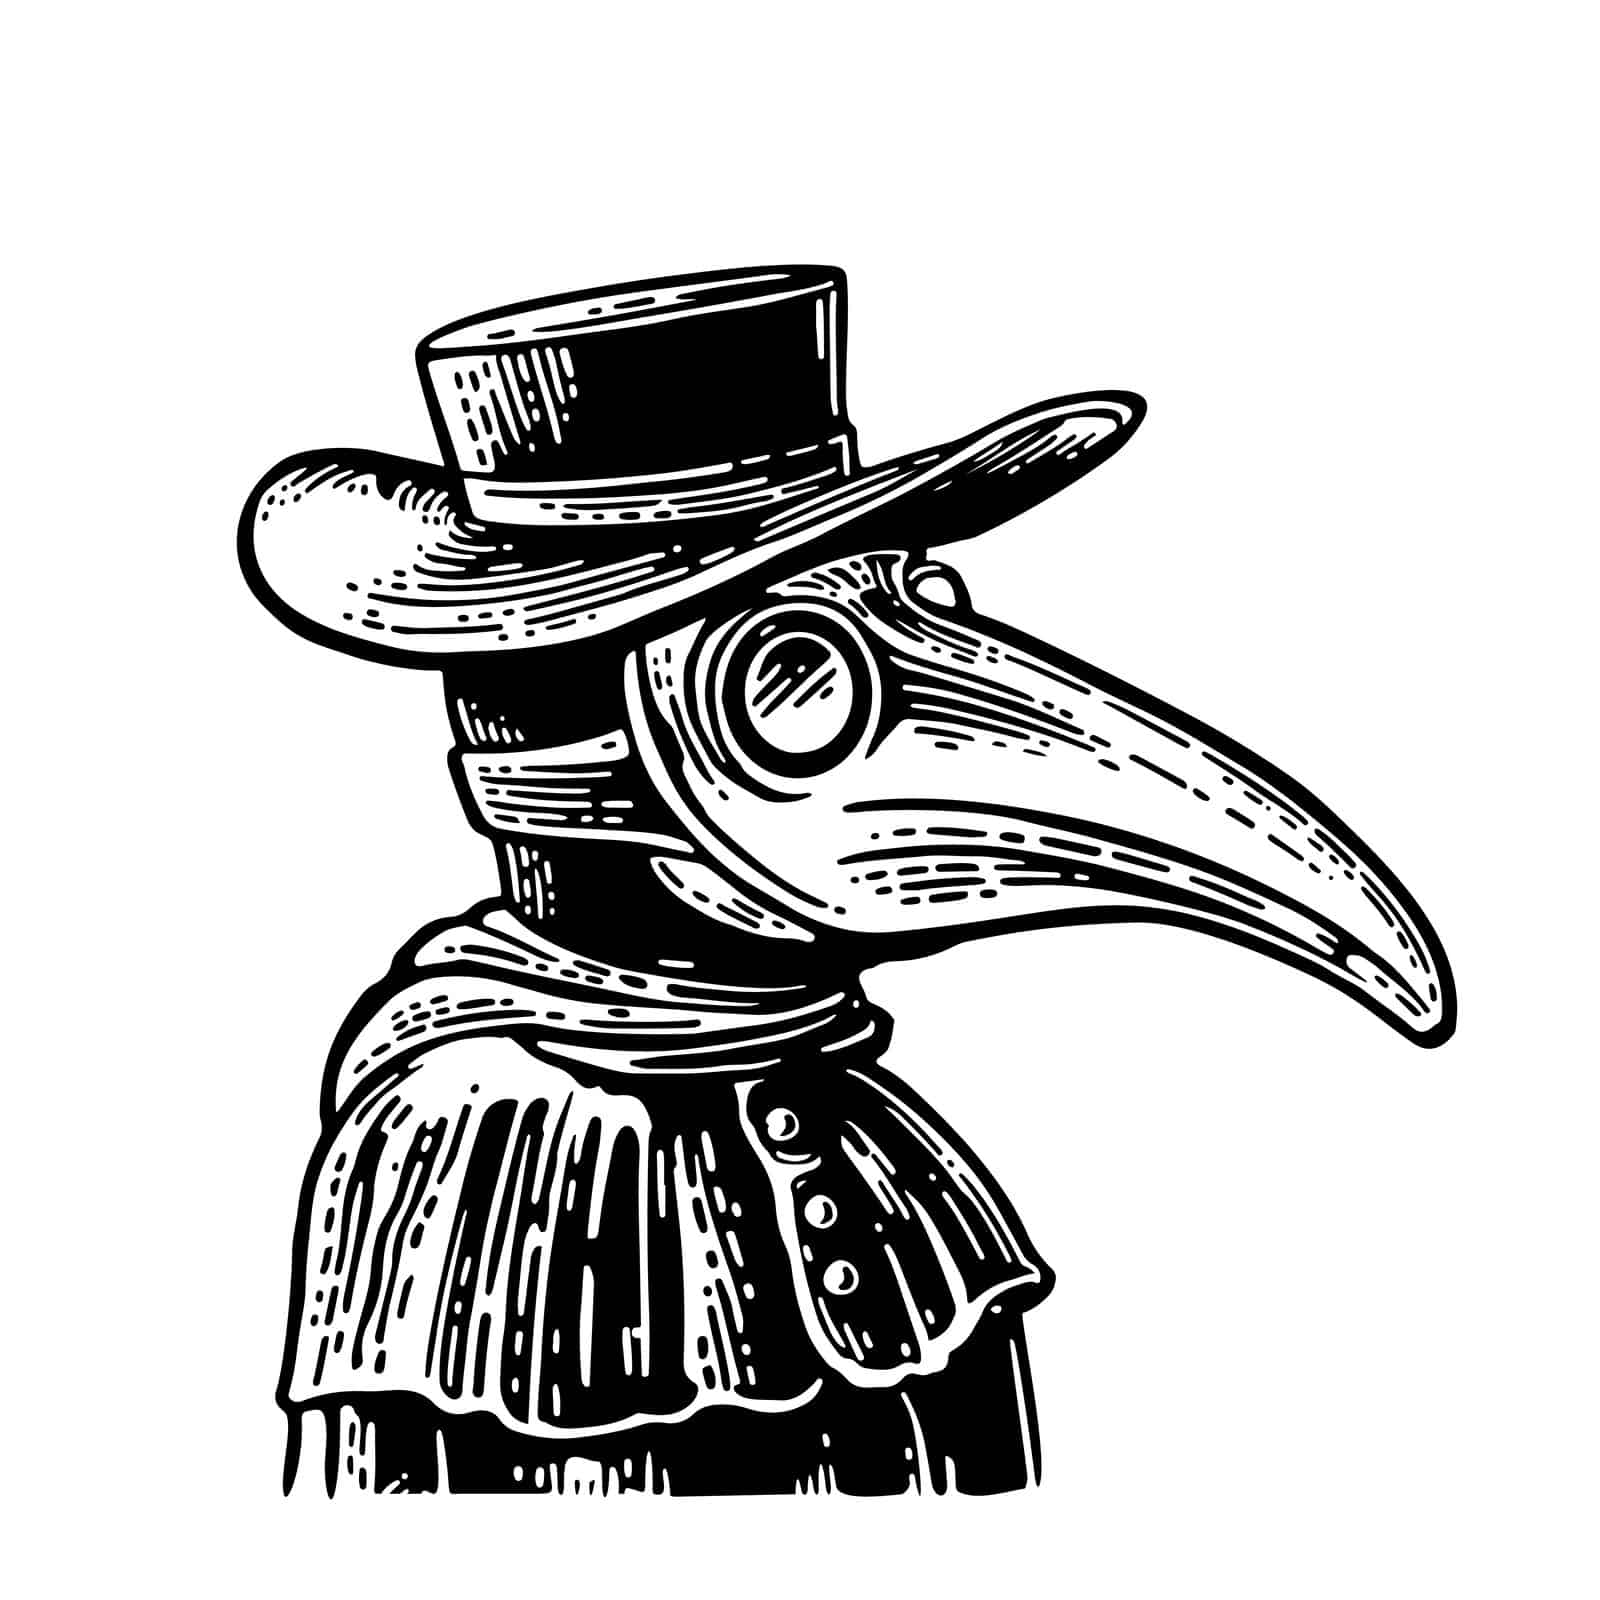 weird cures from history article, picture of plague doctor